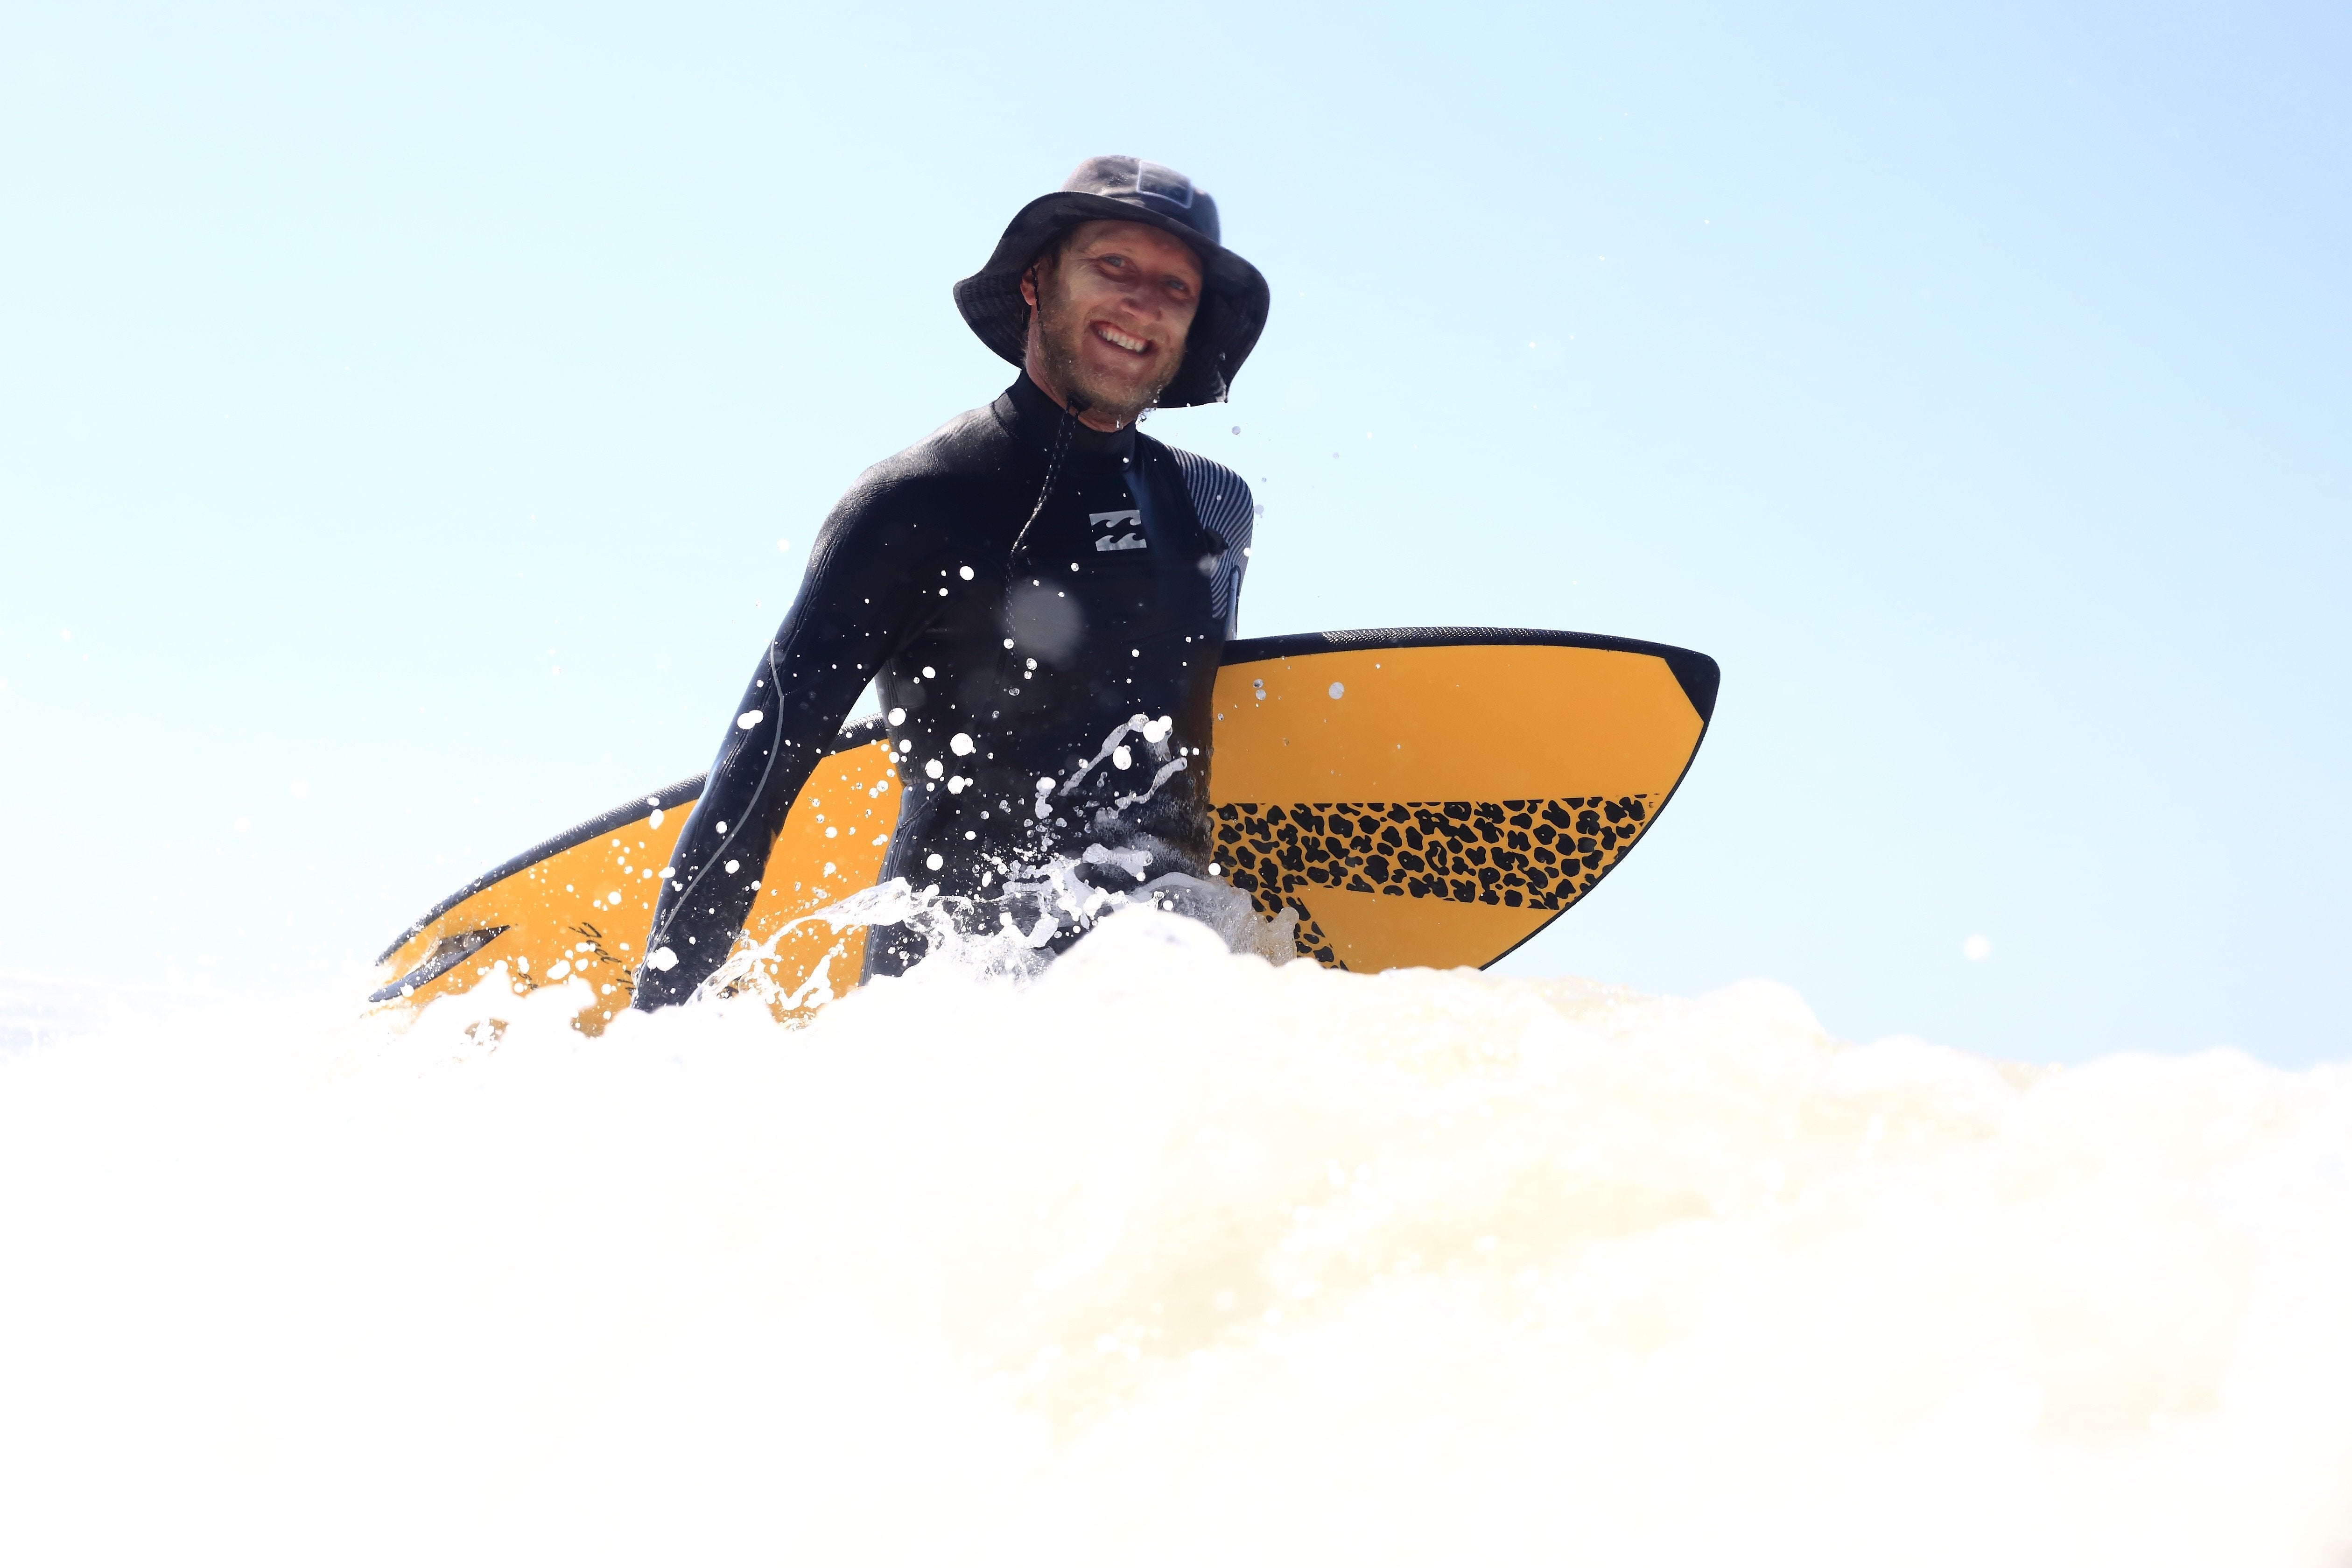 Foam board for learning to surf - Zeus Surf